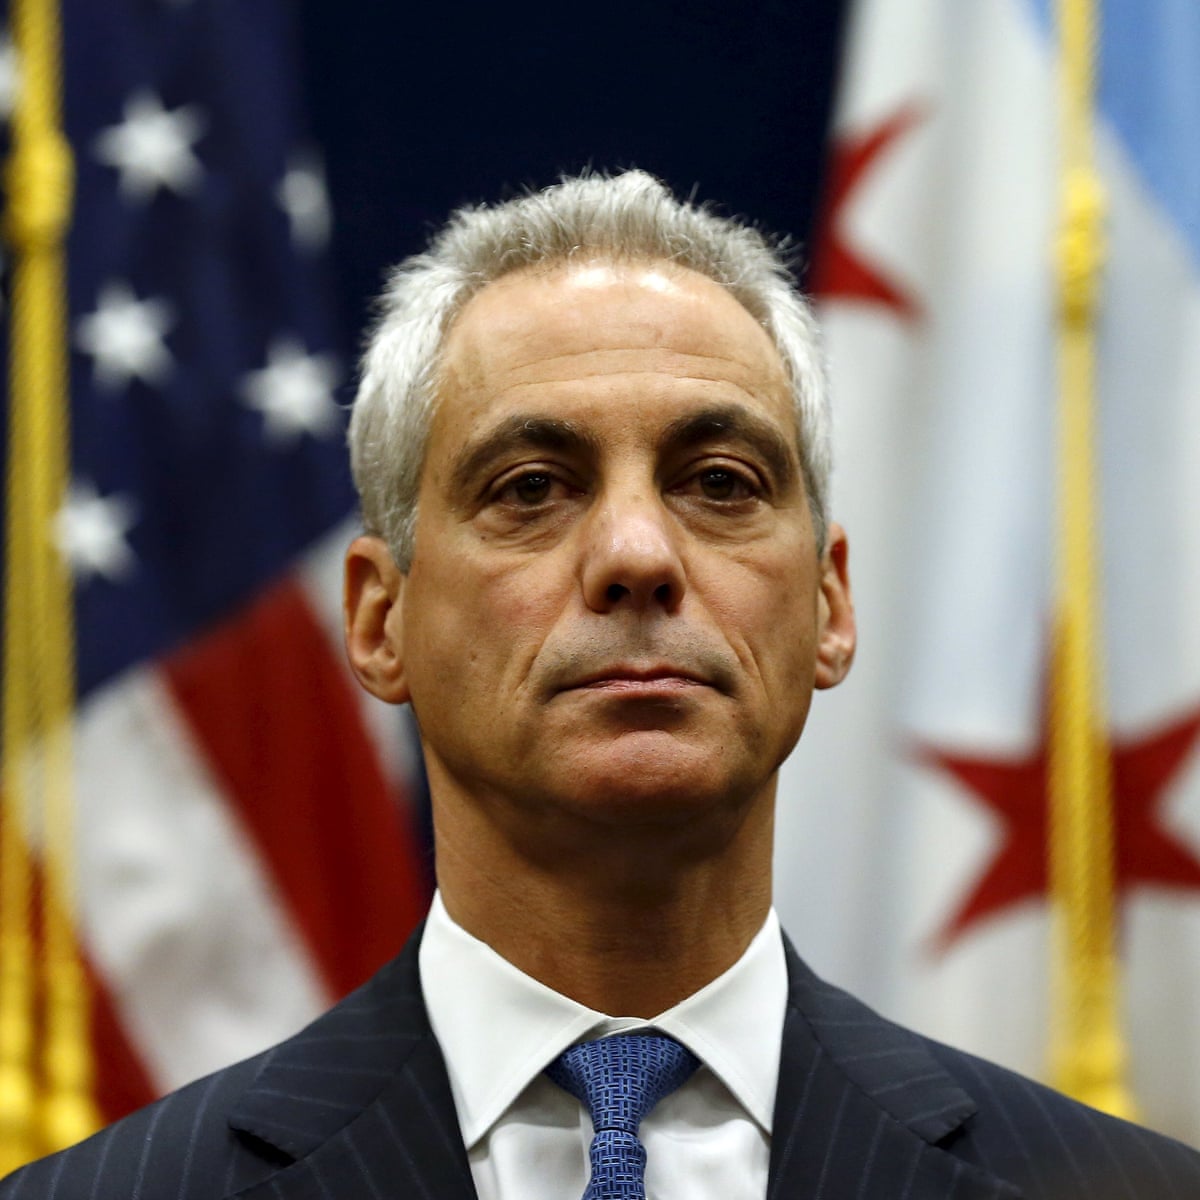 Chicago mayor says 'sorry' for police misconduct in Laquan McDonald case |  Chicago | The Guardian